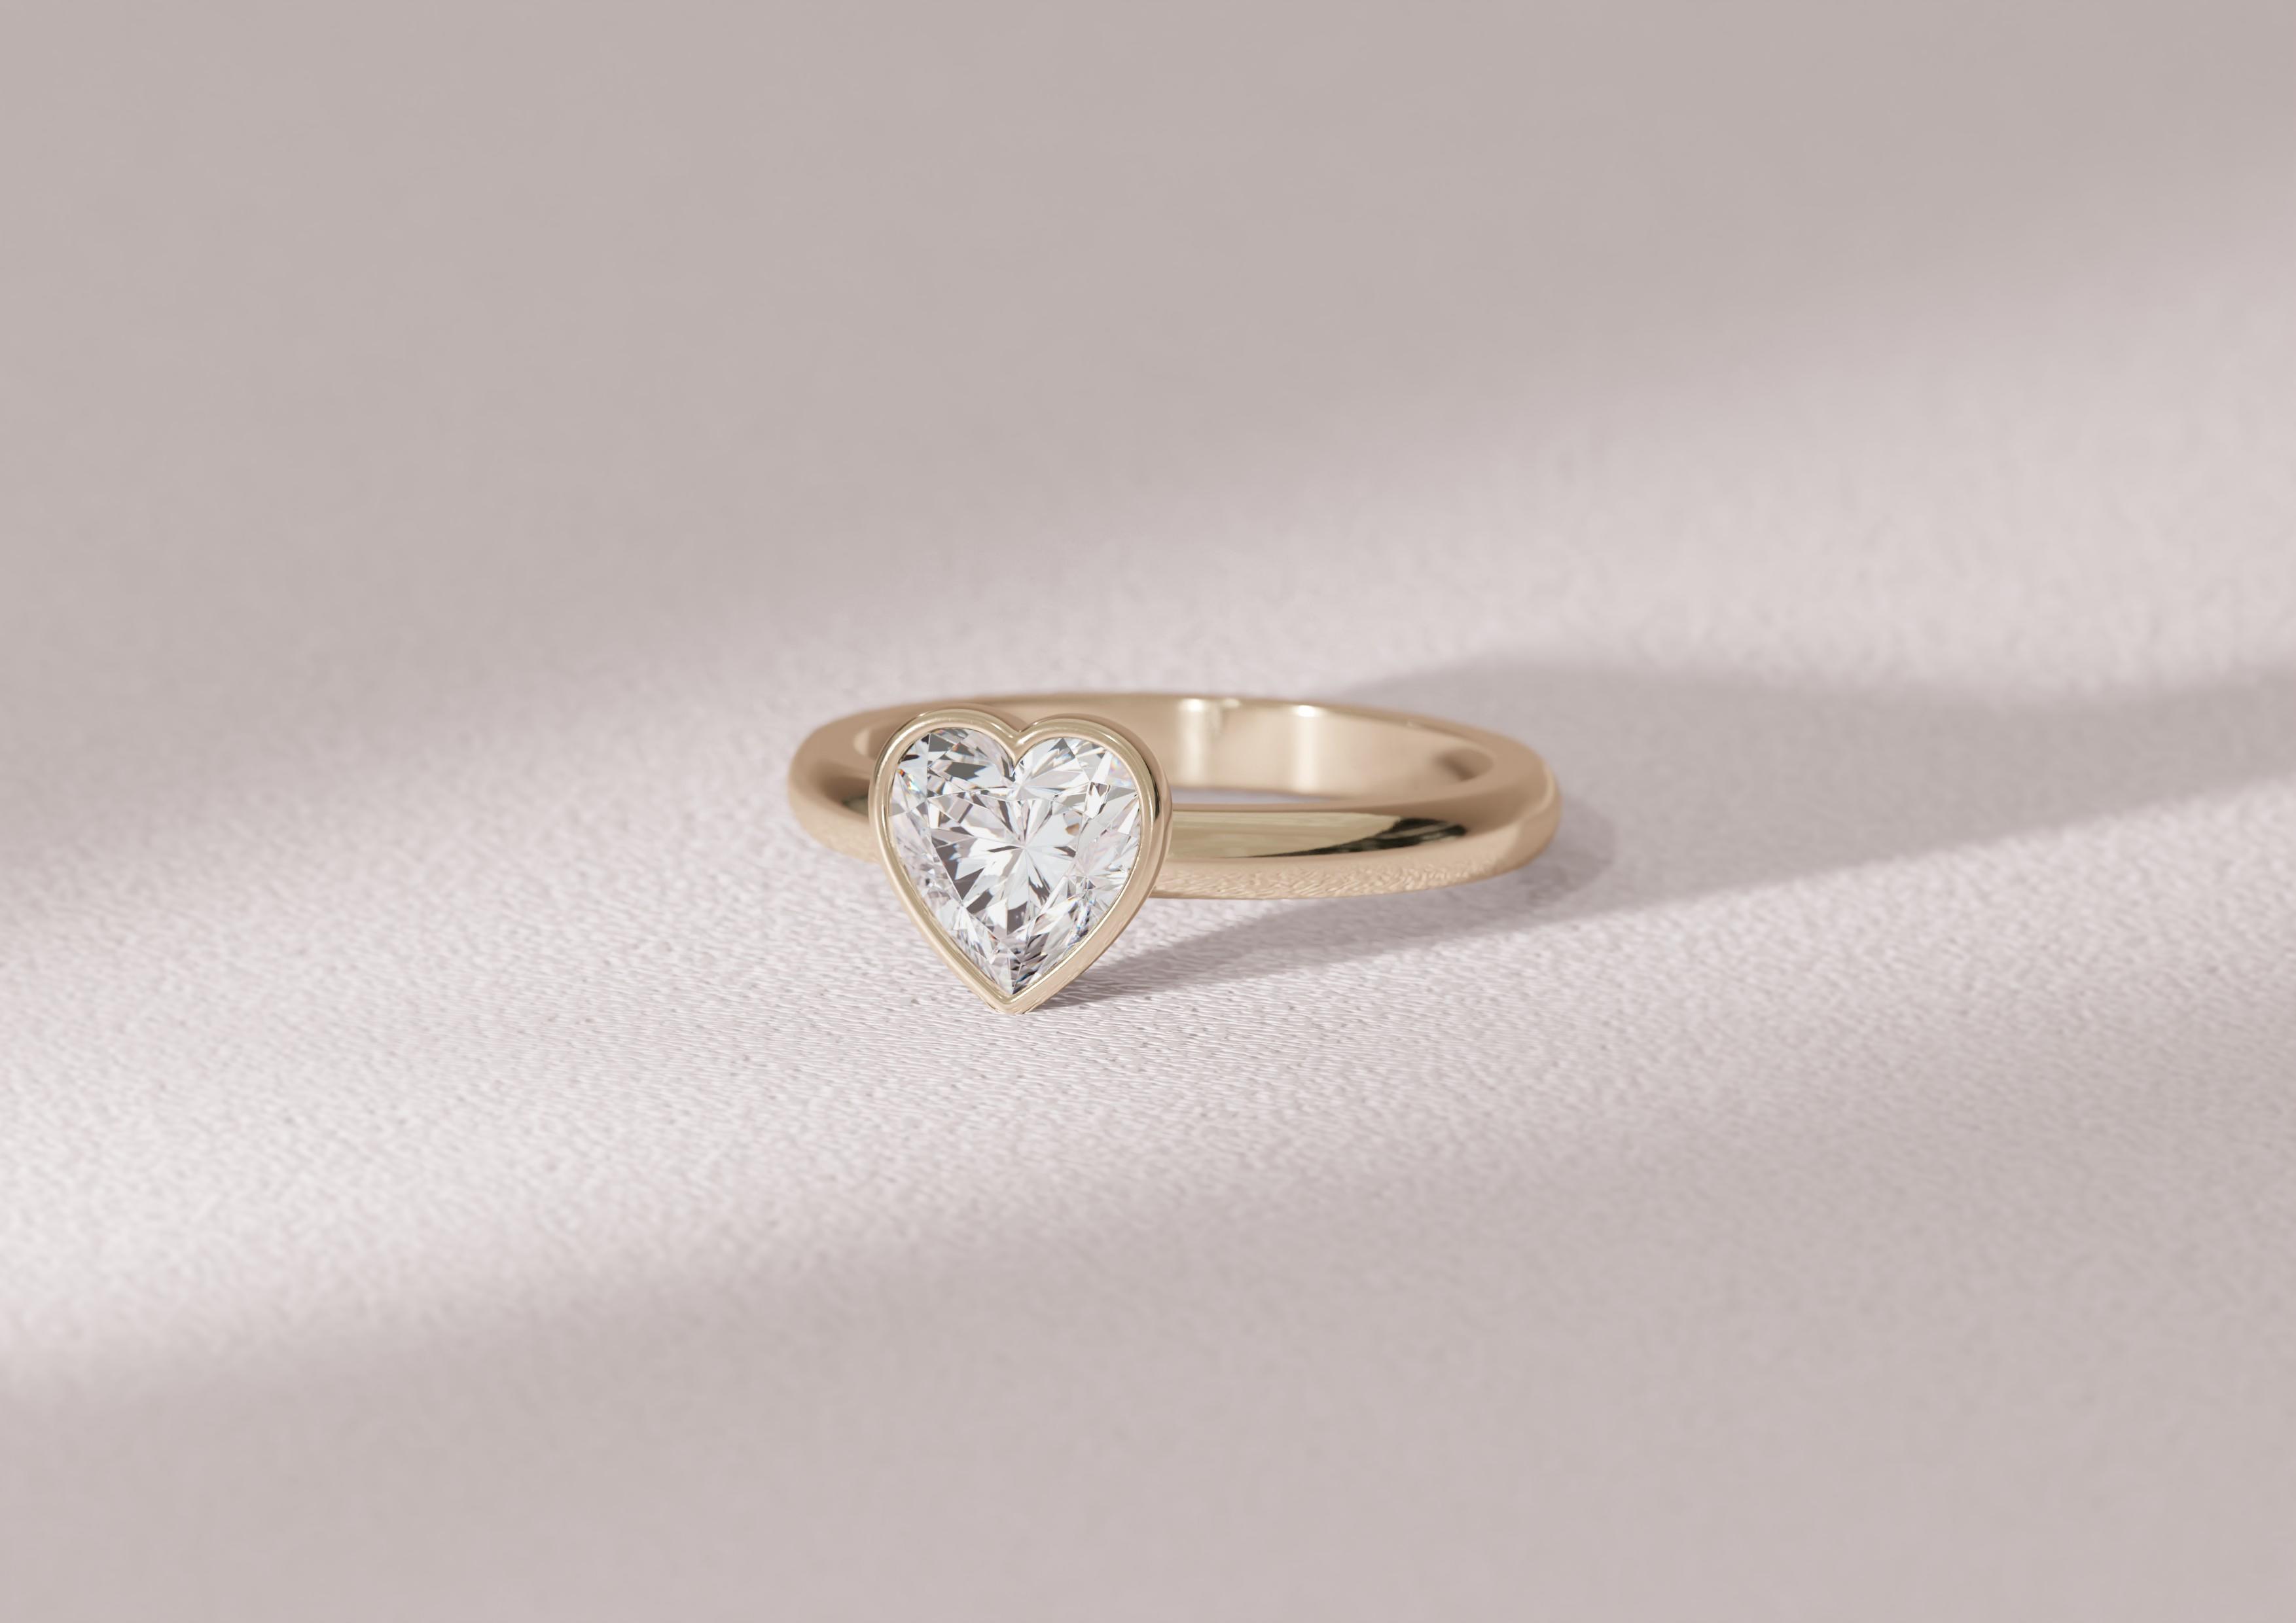 Heart cut diamond with full bezel with a 14k yellow gold band